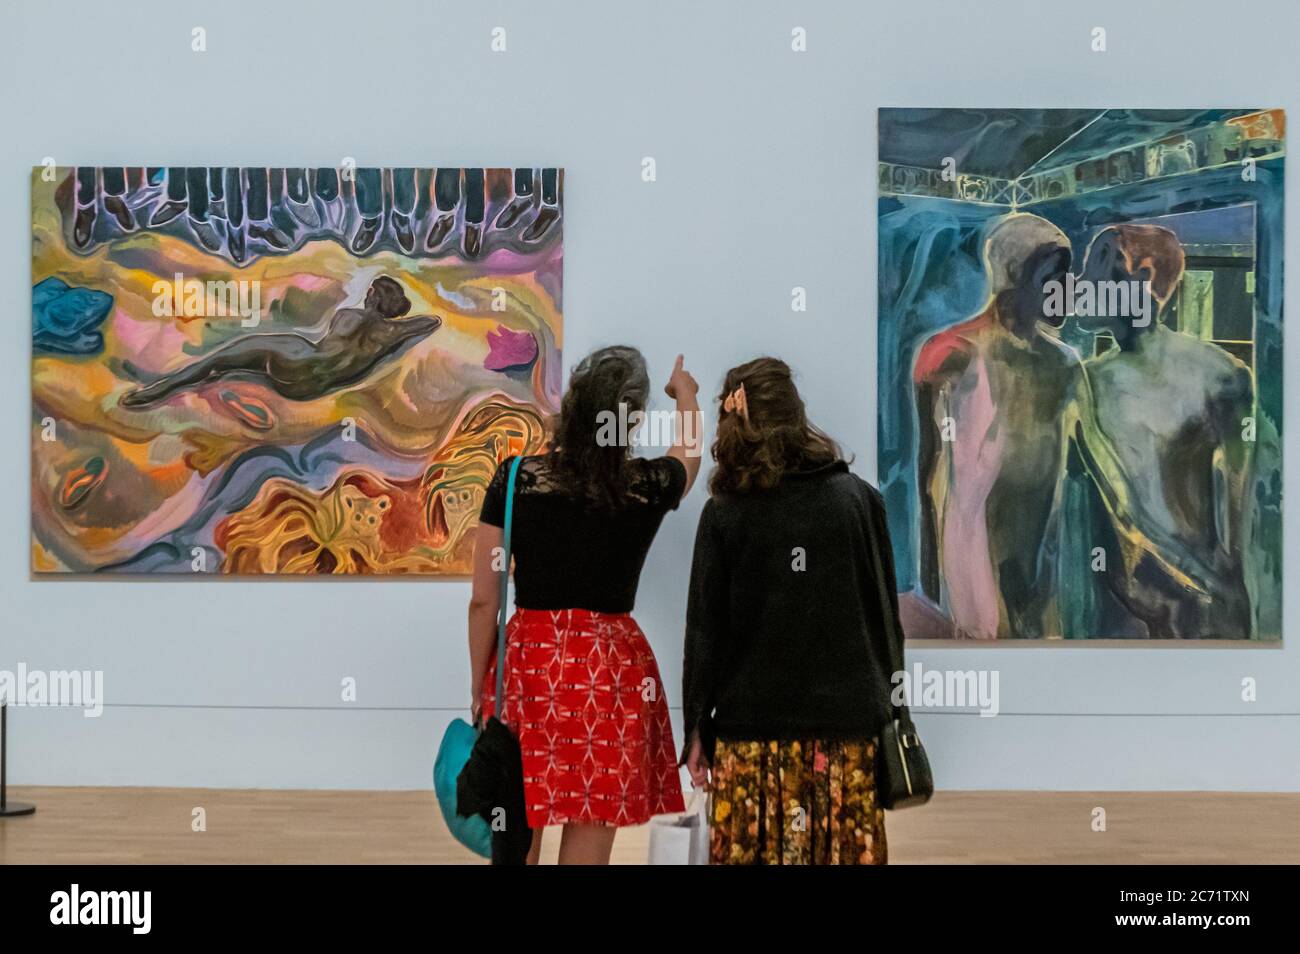 Works by Michael Armitage, incl #mydressmychoice, 2015 - Whitechapel Gallery reopens to the public on 14 July 2020 (after the easing of Coronavirus, covid 19, lockdown restrictions) with new Health & Safety measures in place to prioritise the welfare of staff and visitors. The spring exhibition programme, including Radical Figures: Painting in the New Millennium will be extended through the summer. In line with guidance from Public Health England, the gallery has put the following measures in place, ensuring the exhibitions and displays can be enjoyed in a safe and accessible way - Timed entry Stock Photo